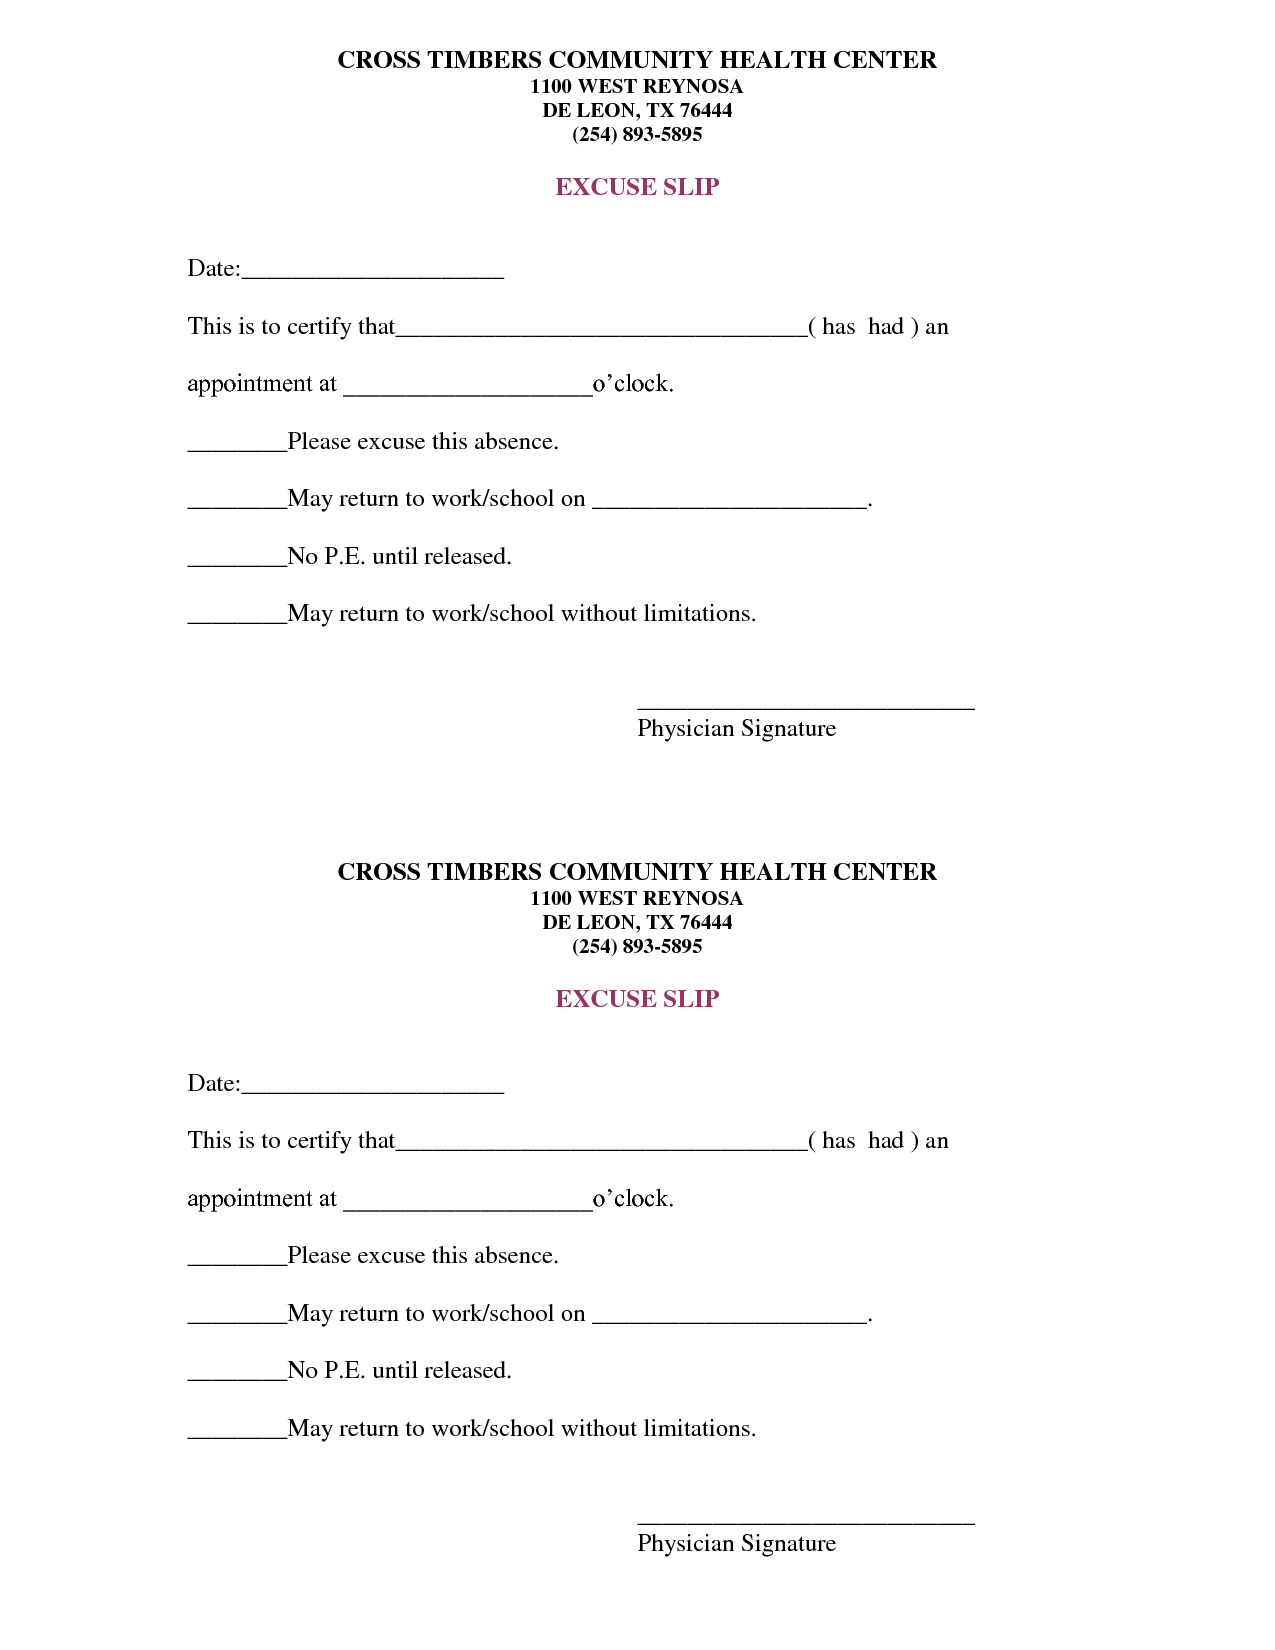 Free Doctors Note Template | Scope Of Work Template | On The Run - Free Printable Doctors Notes Templates